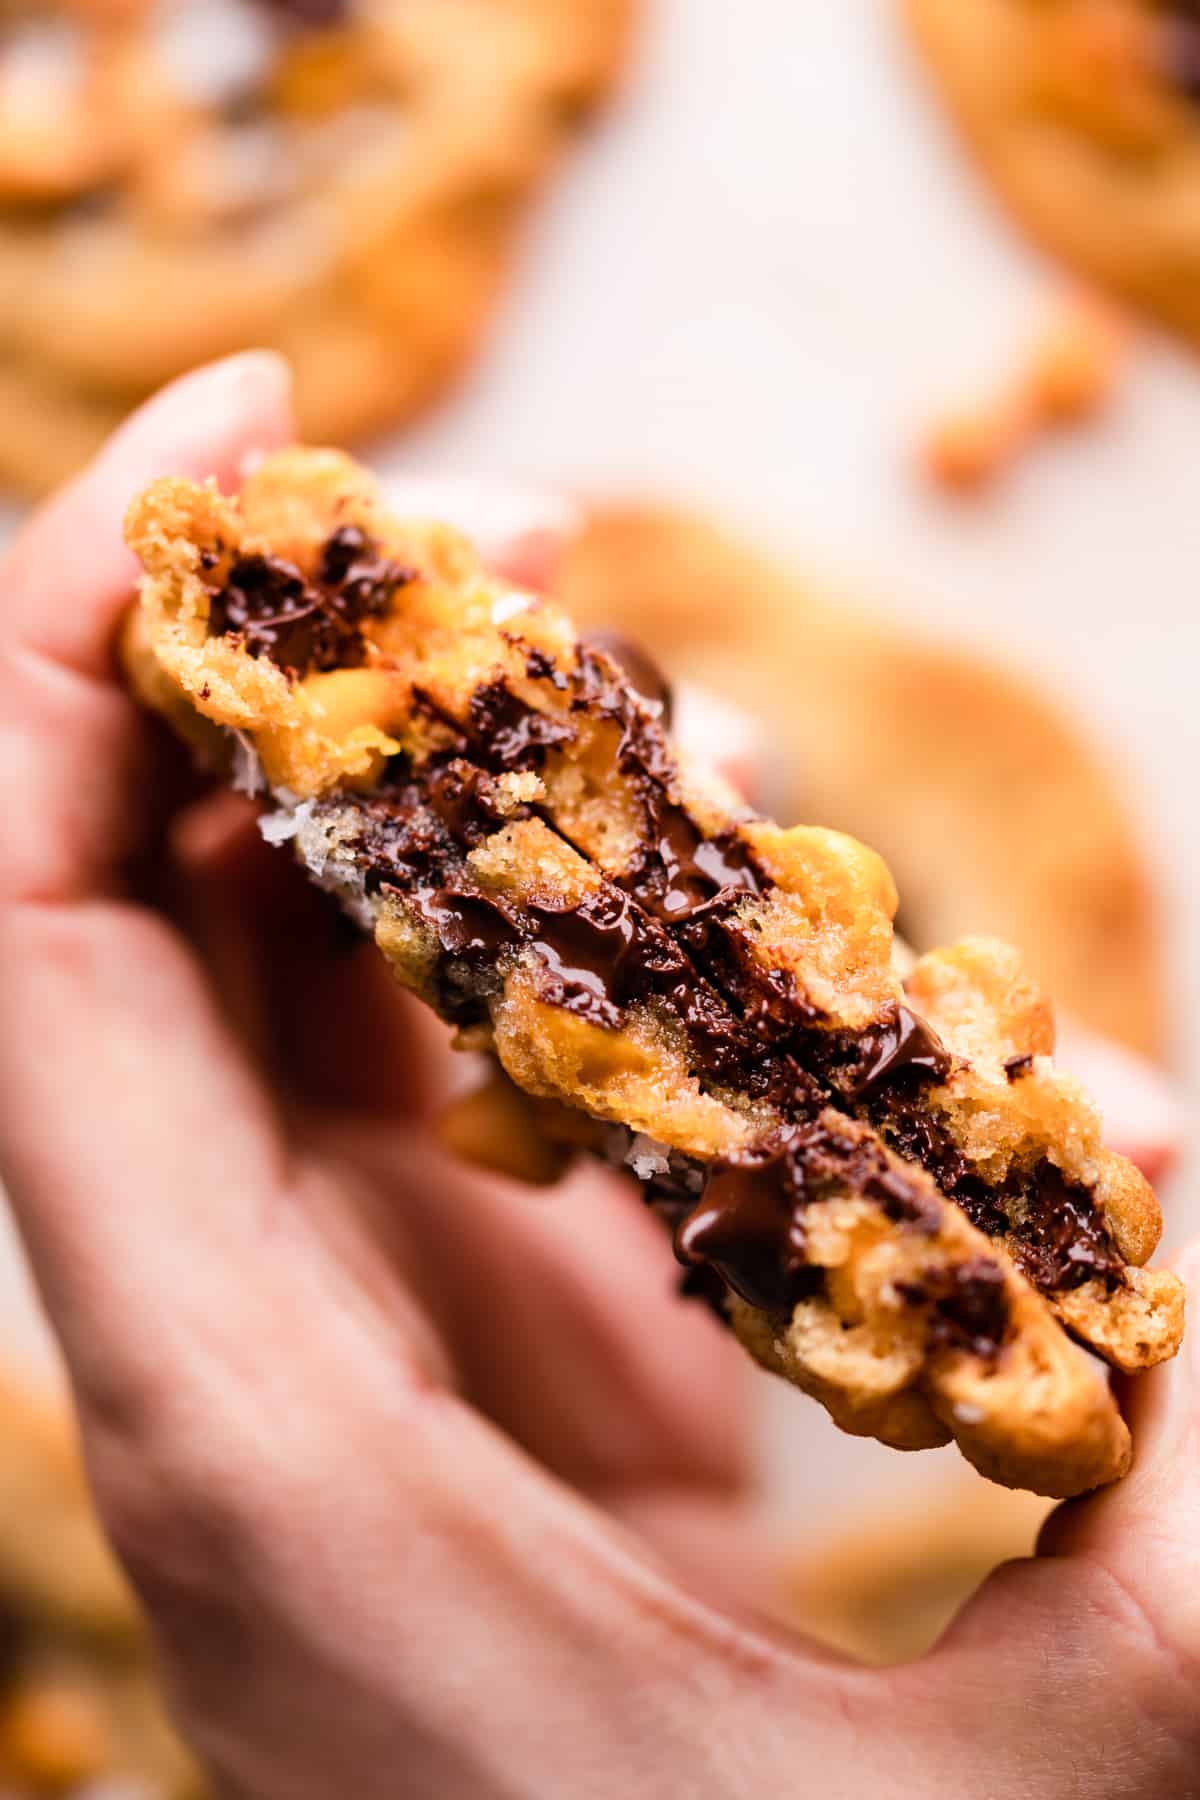 hand holding butterscotch choc chip cookie split in half showing melted baking chips inside.